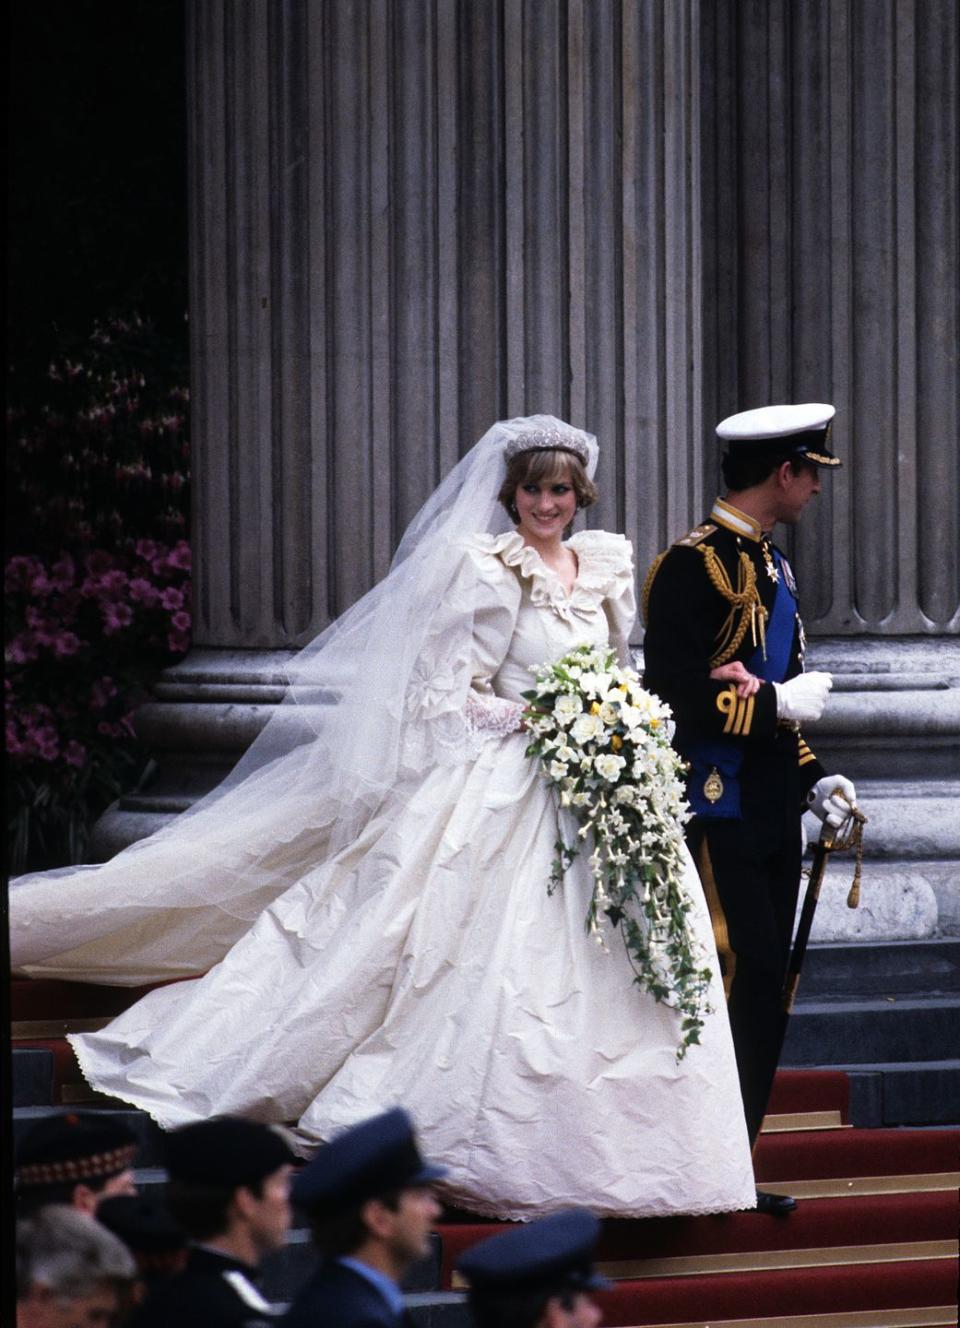 <p>Princess Diana's gown is arguably the most iconic wedding gown in history. The dramatic white dress was designed by David and Elizabeth Emanuel and featured a ruffled collar, long sleeves, and fabric for days.</p>